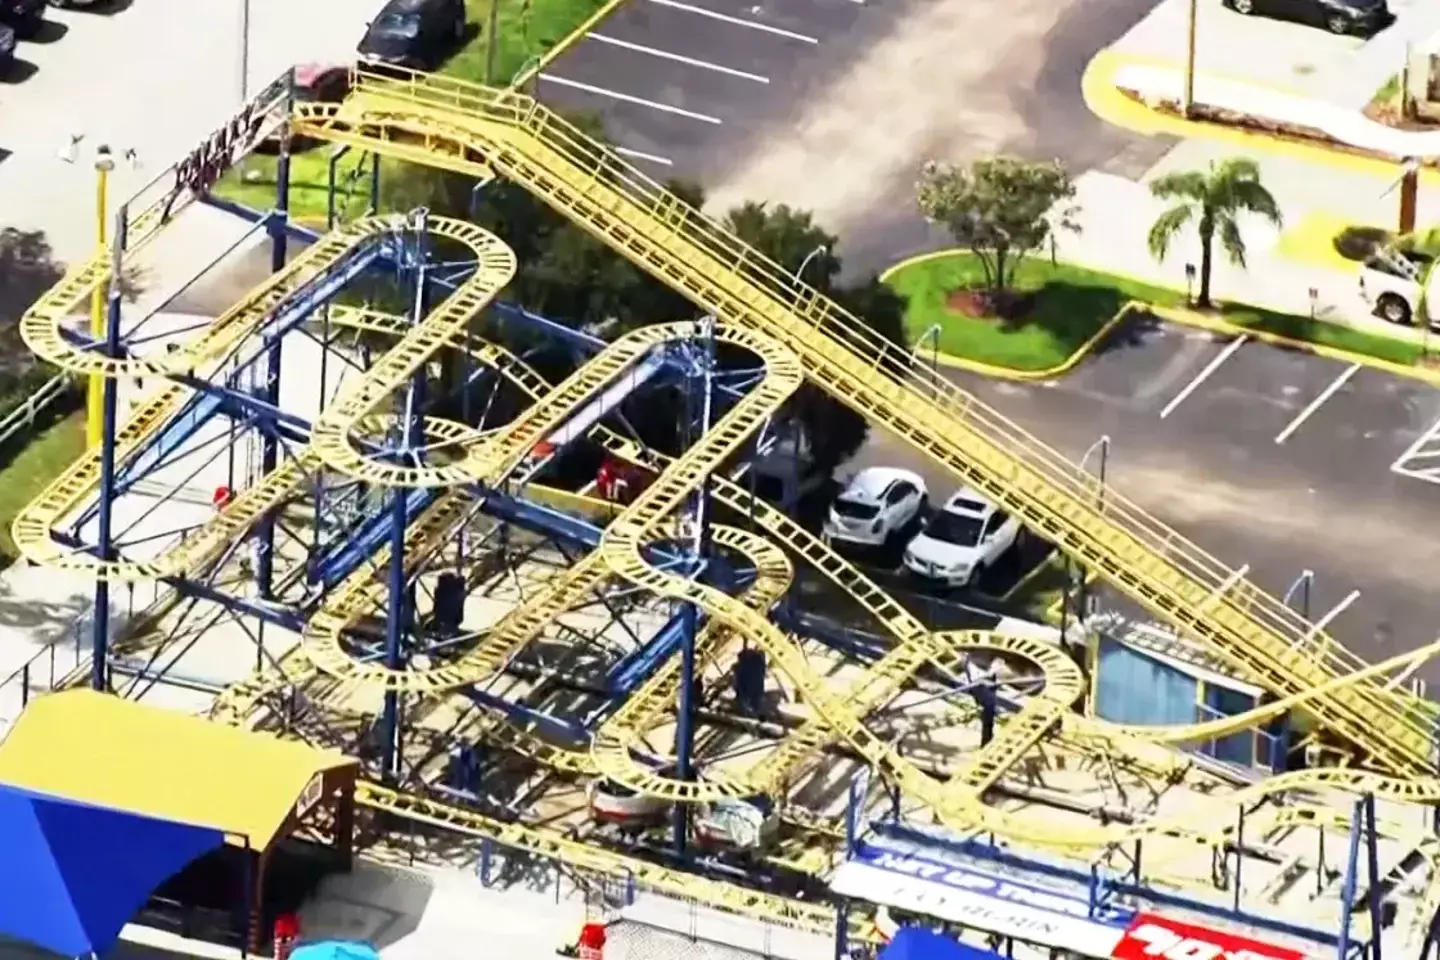 The Galaxy Spin ride at Fun Spot in Florida, which has been closed after a six-year-old boy fell from it earlier this week.